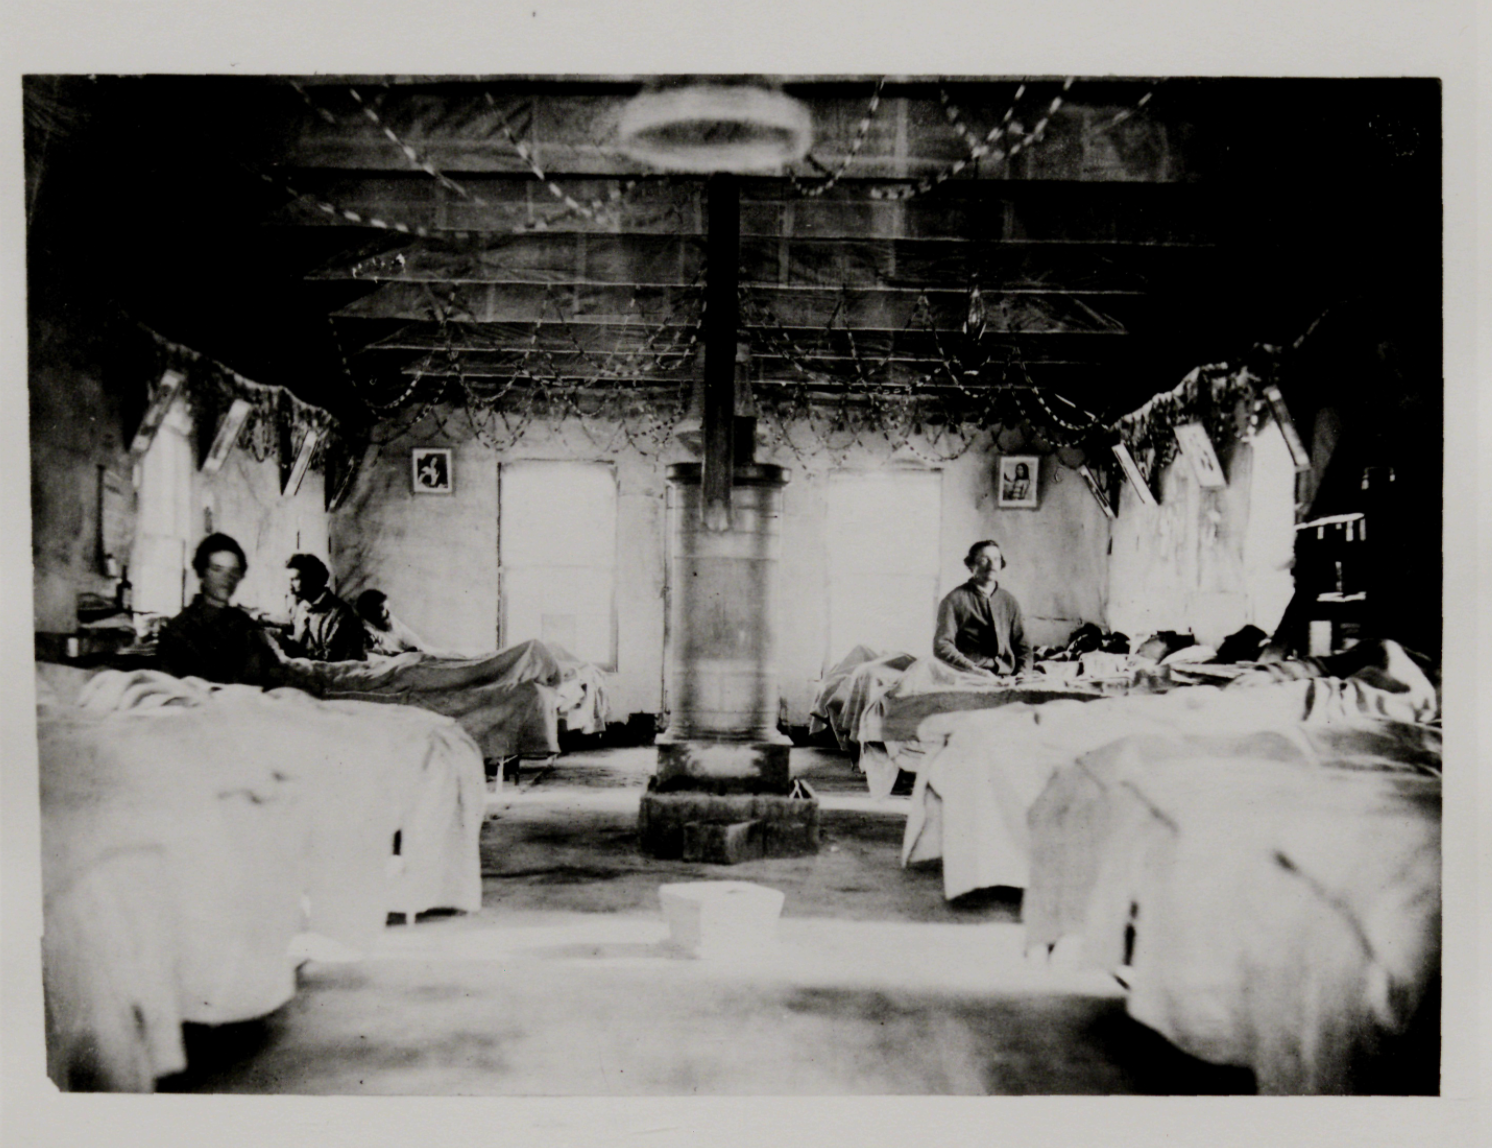 Civil War Rank and File (Black and white photo of Civil War era hospital room with patients in beds and nurses)